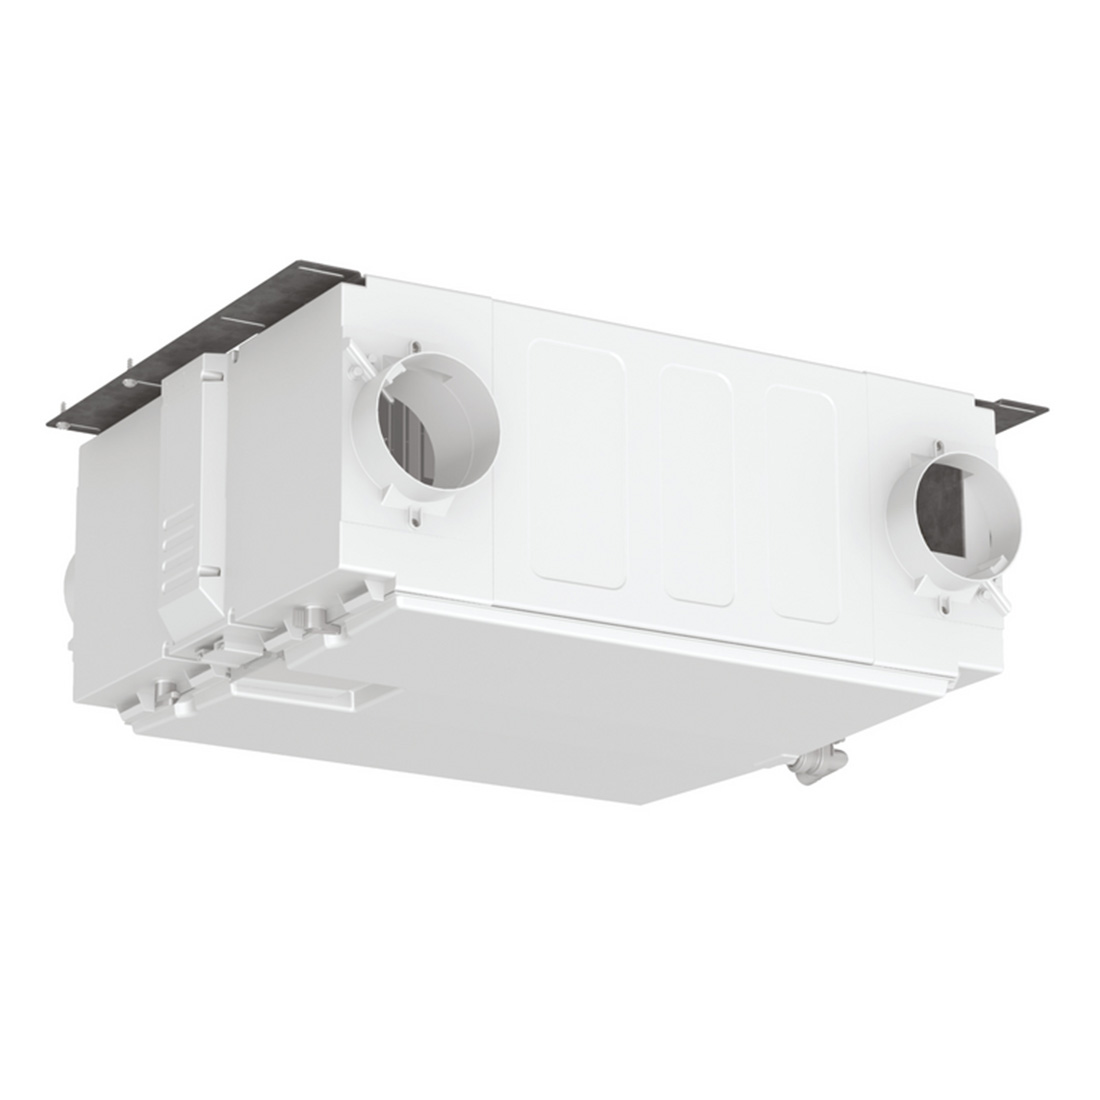 Zehnder ComfoAir 155 WM for ceiling mounting